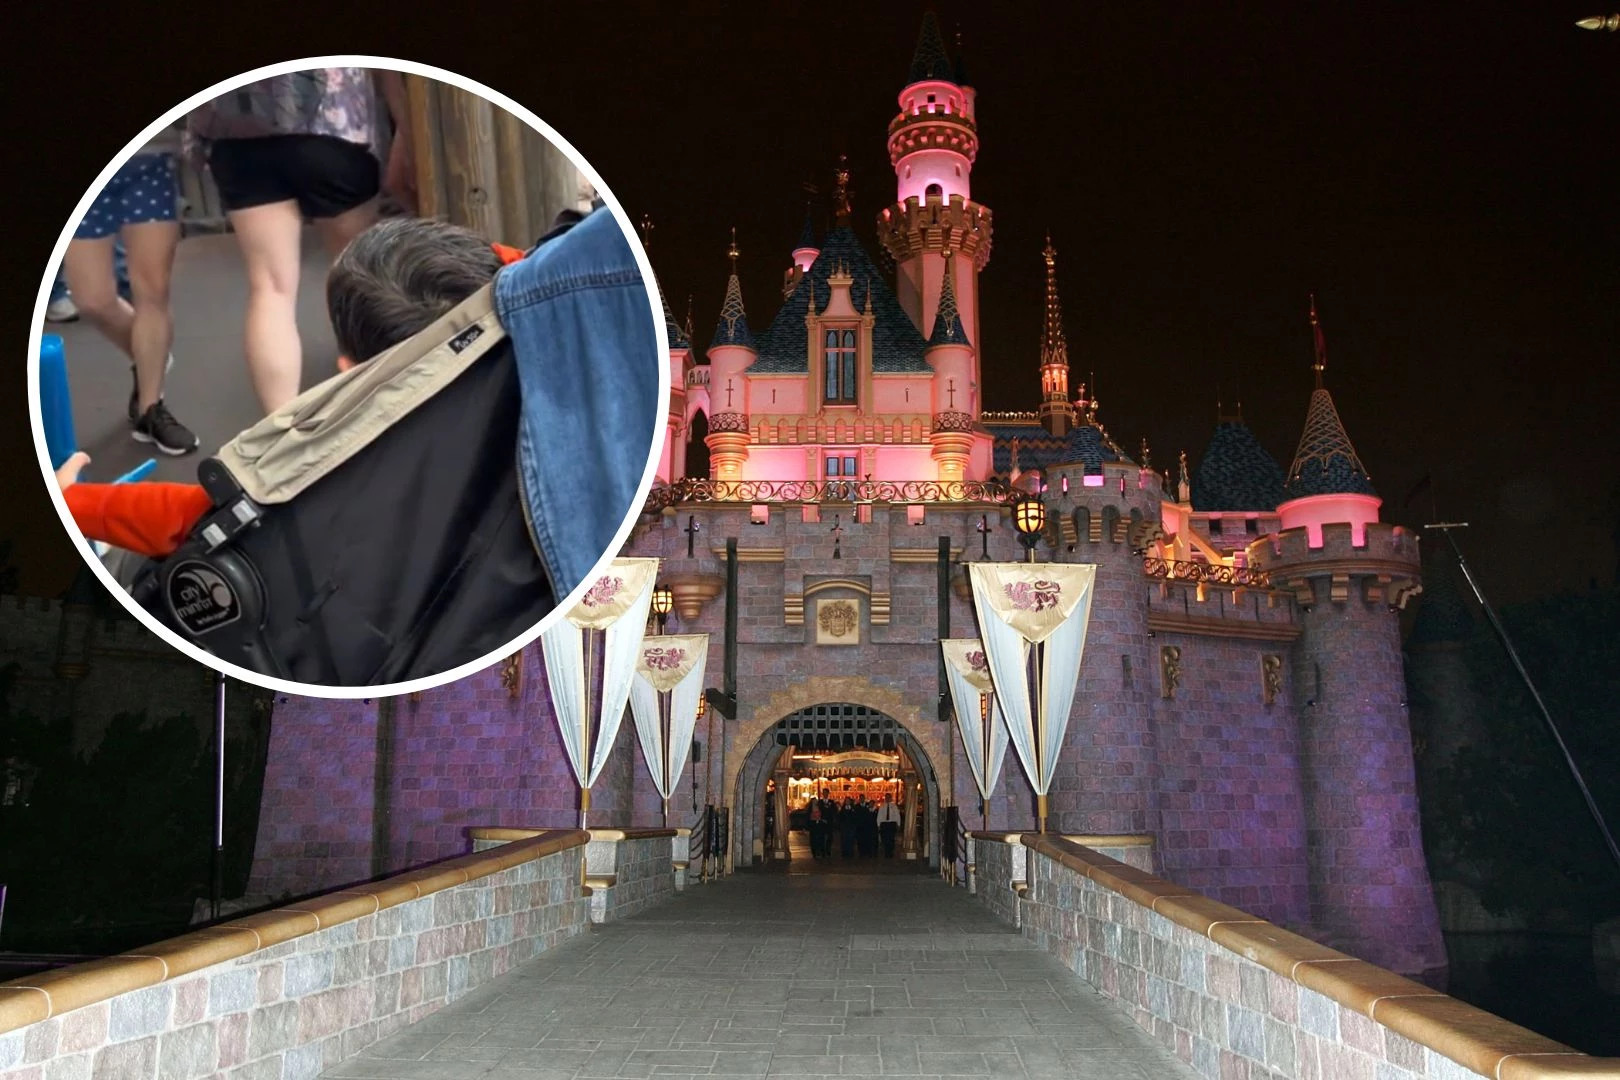 Disneyland Guests Accused of Leaving Child Unattended in Stroller pic pic